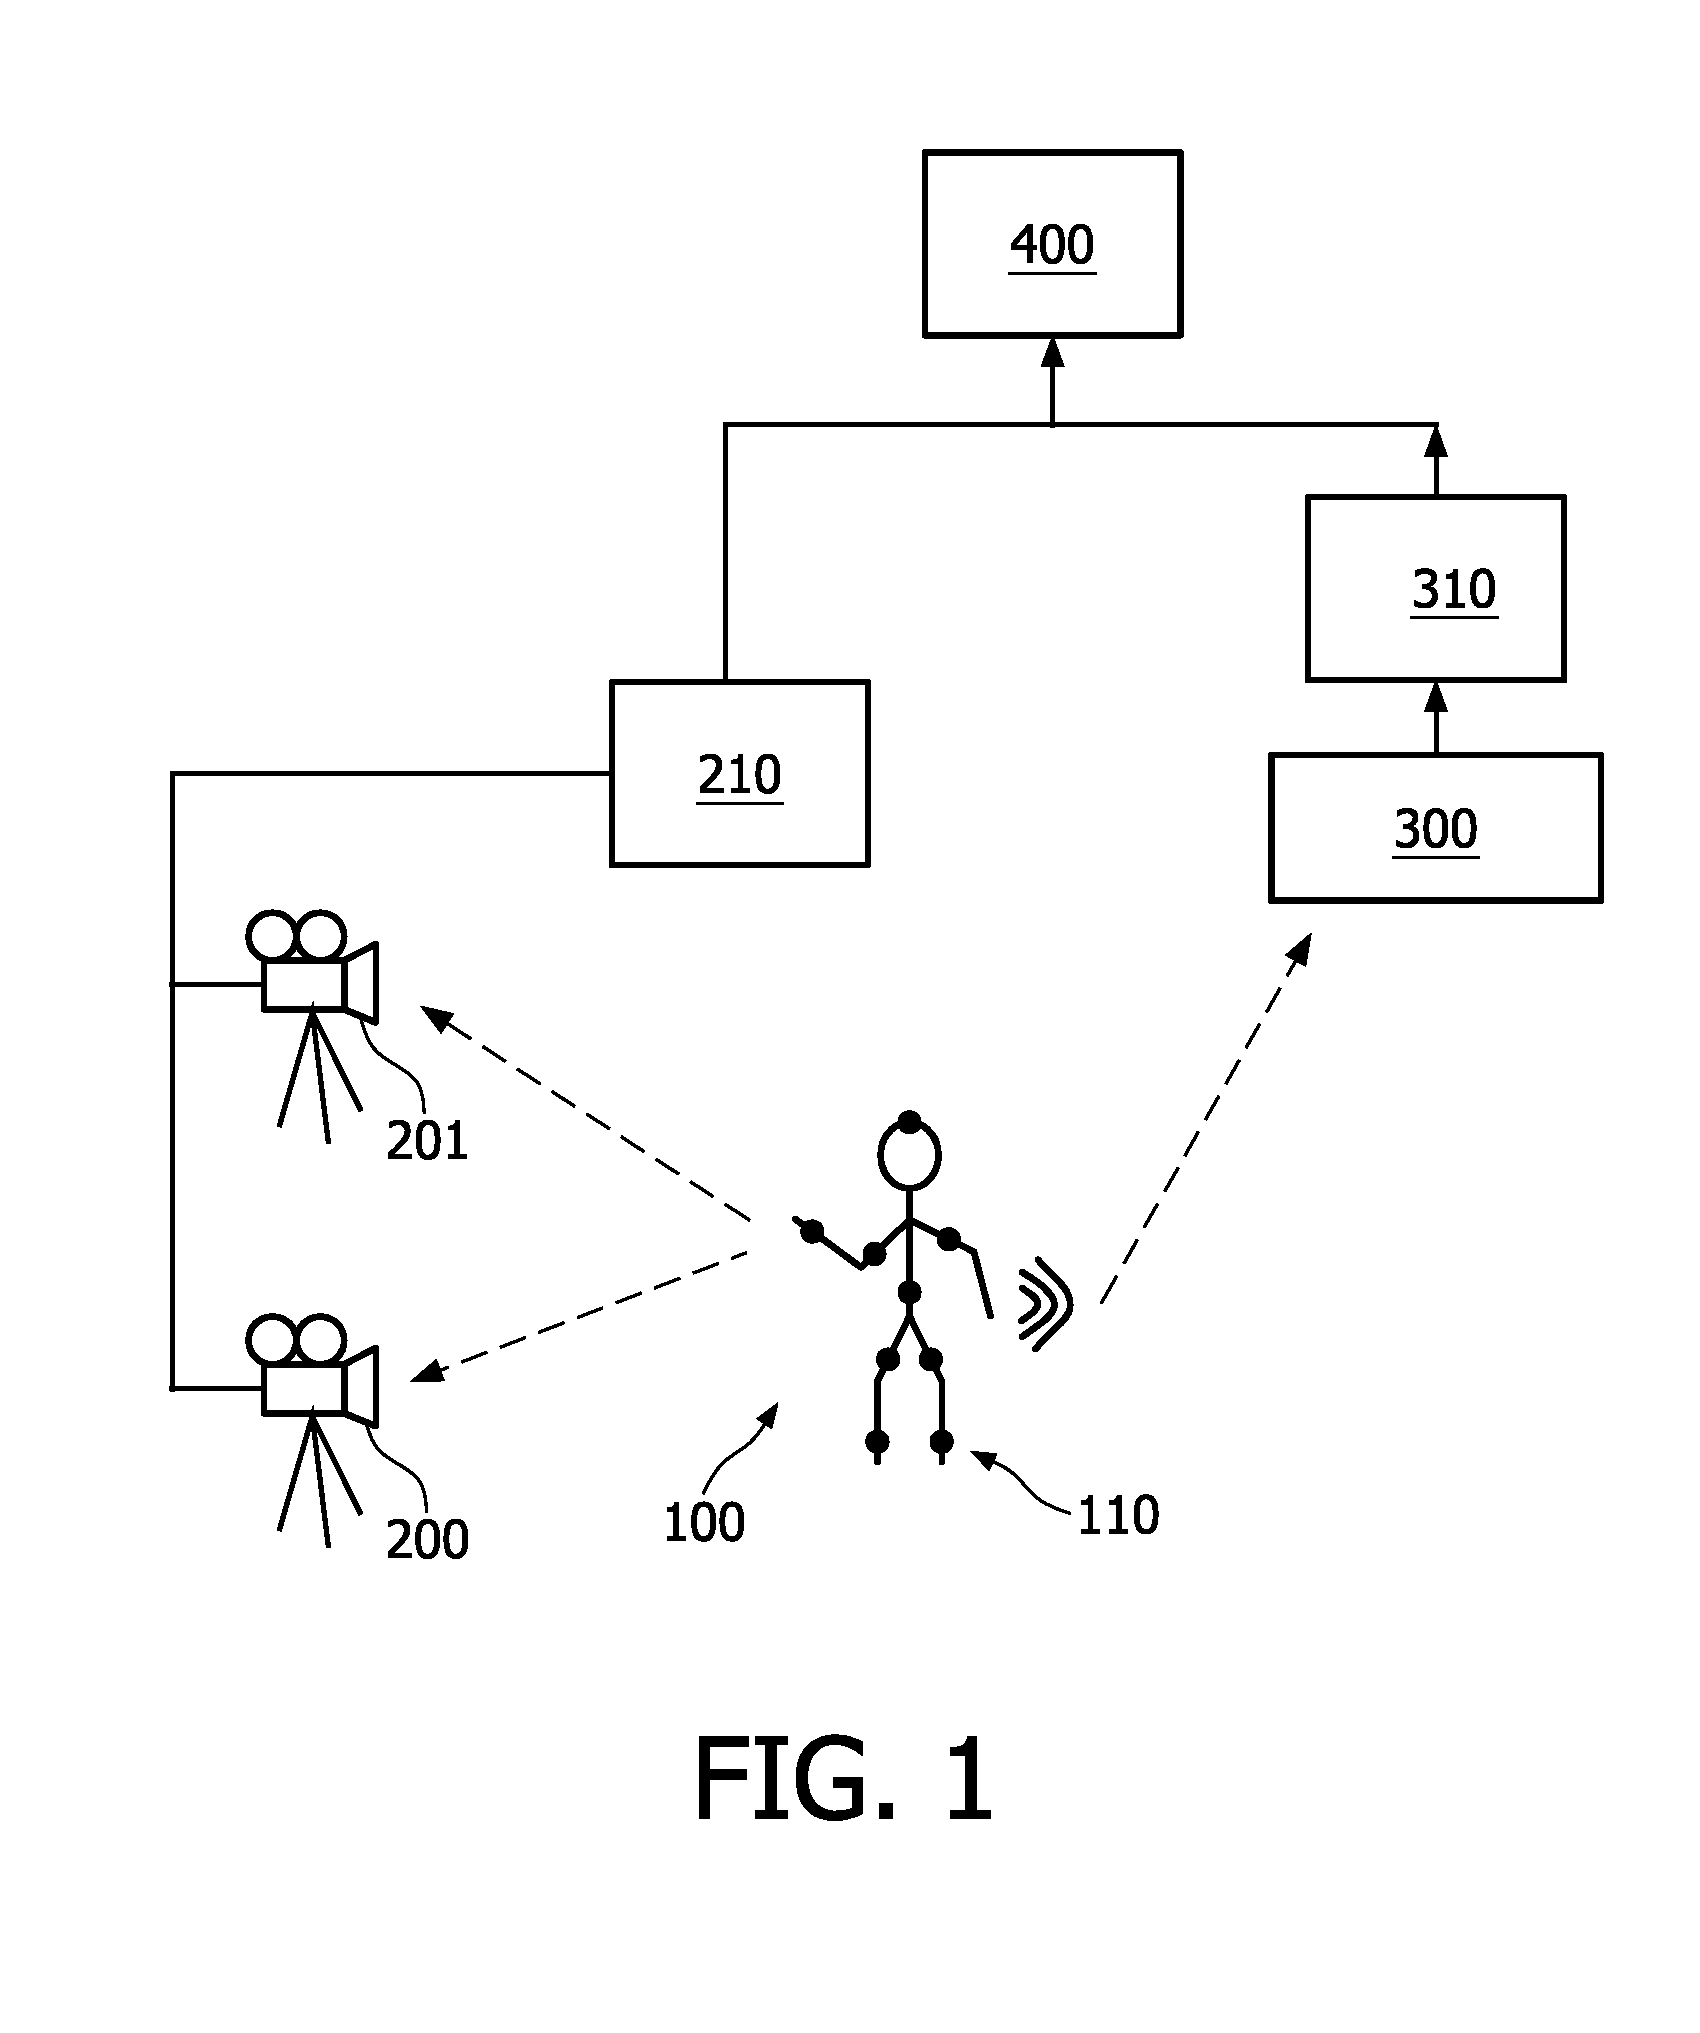 Object motion capturing system and method